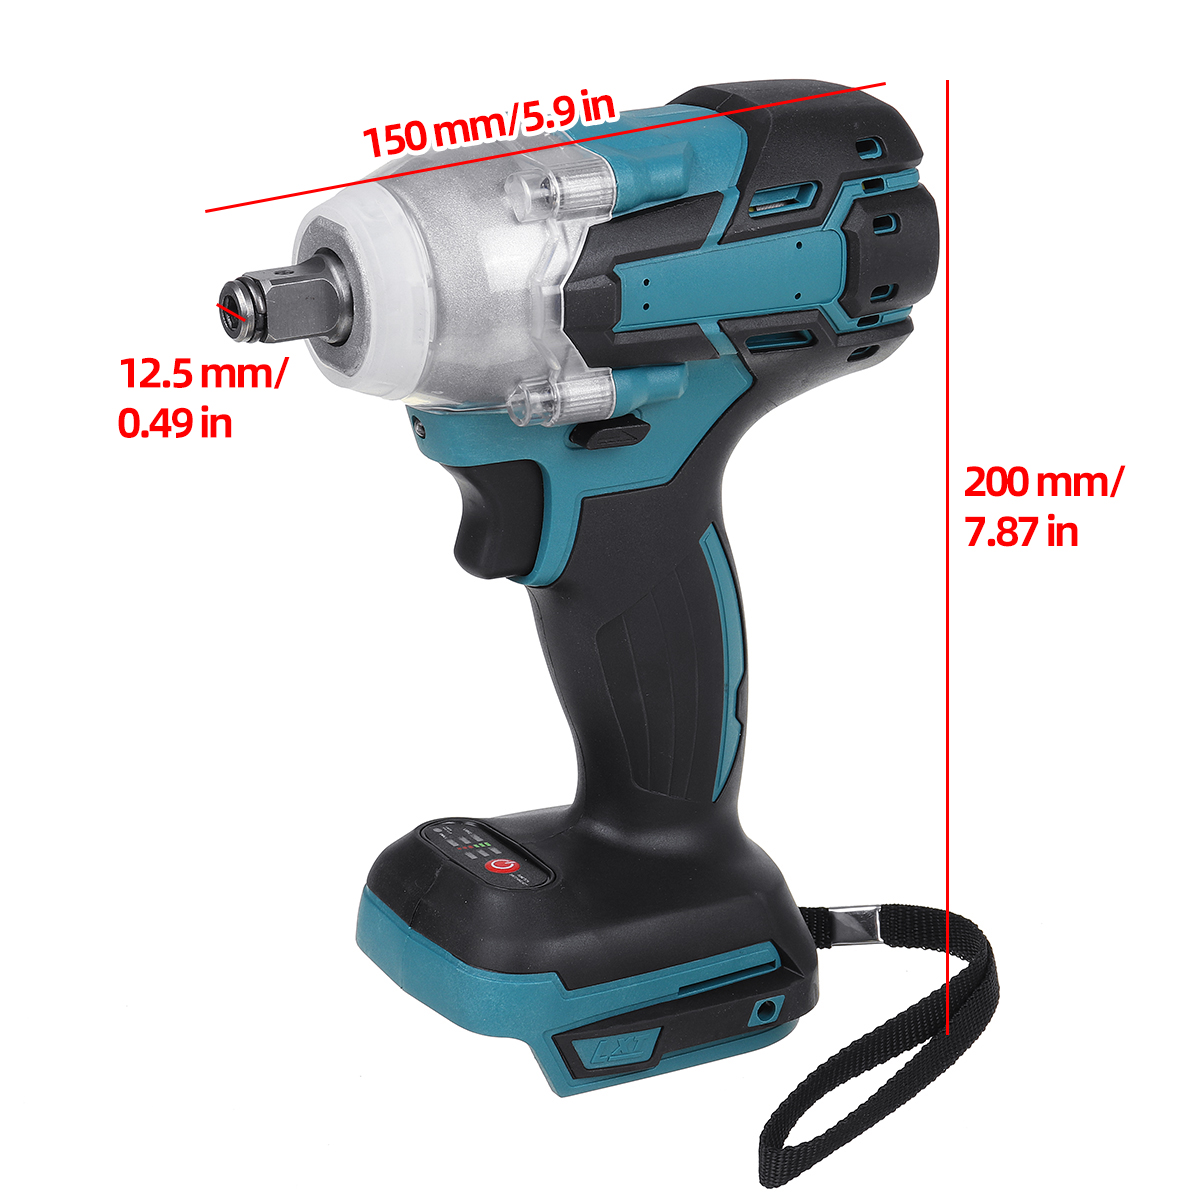 325-Nm-12-Brushless-Cordless-Electric-Impact-Wrench-Torque-Hand-Drill-for-Makita-18V-Battery-1772610-11